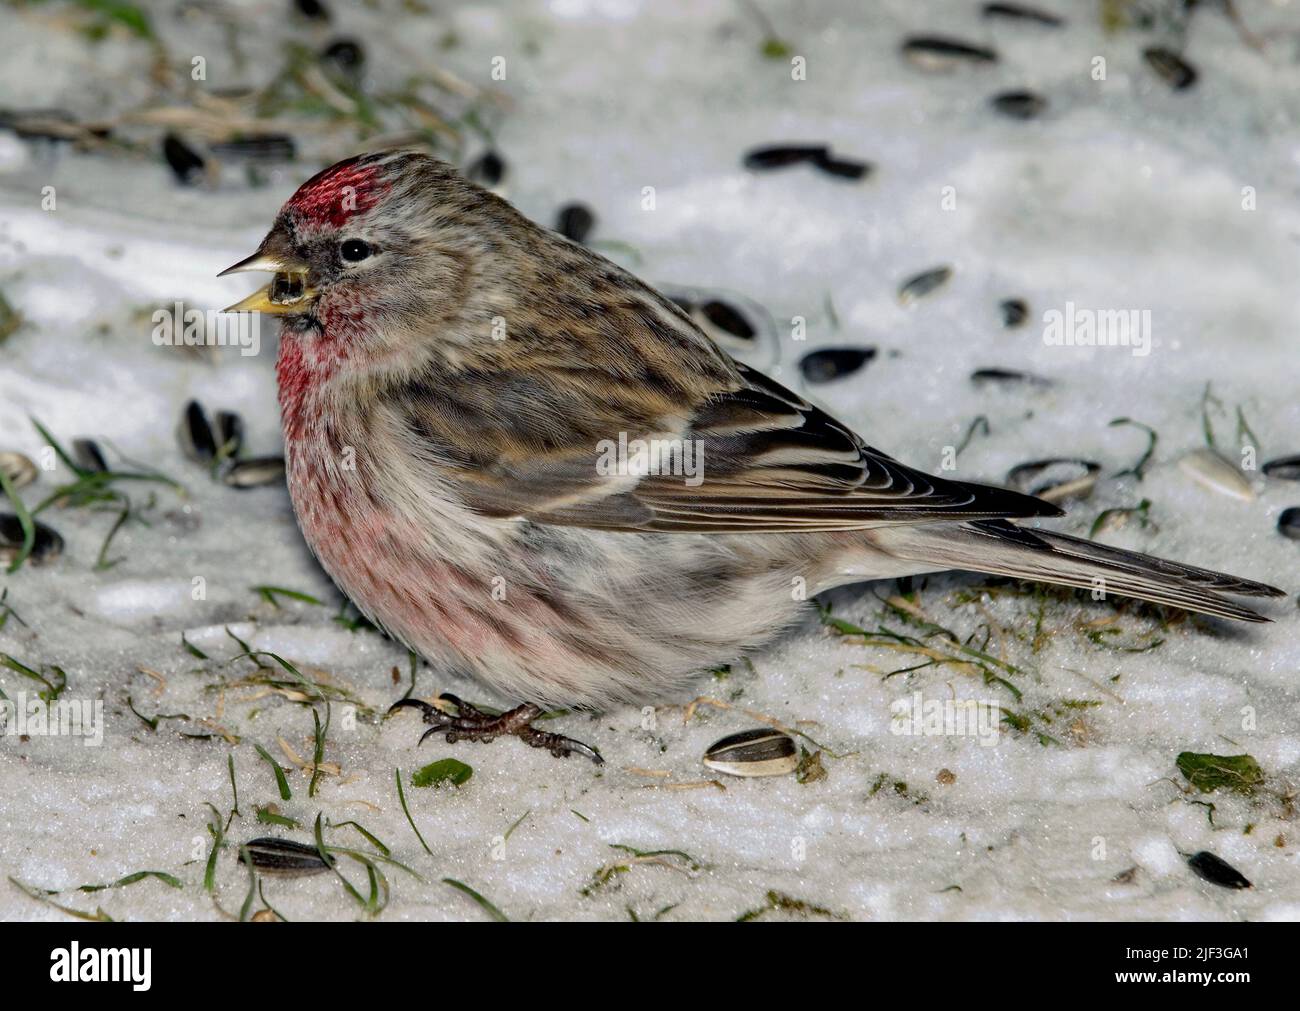 Common Redpoll (Carduelis flammea) from South-western Norway. Stock Photo